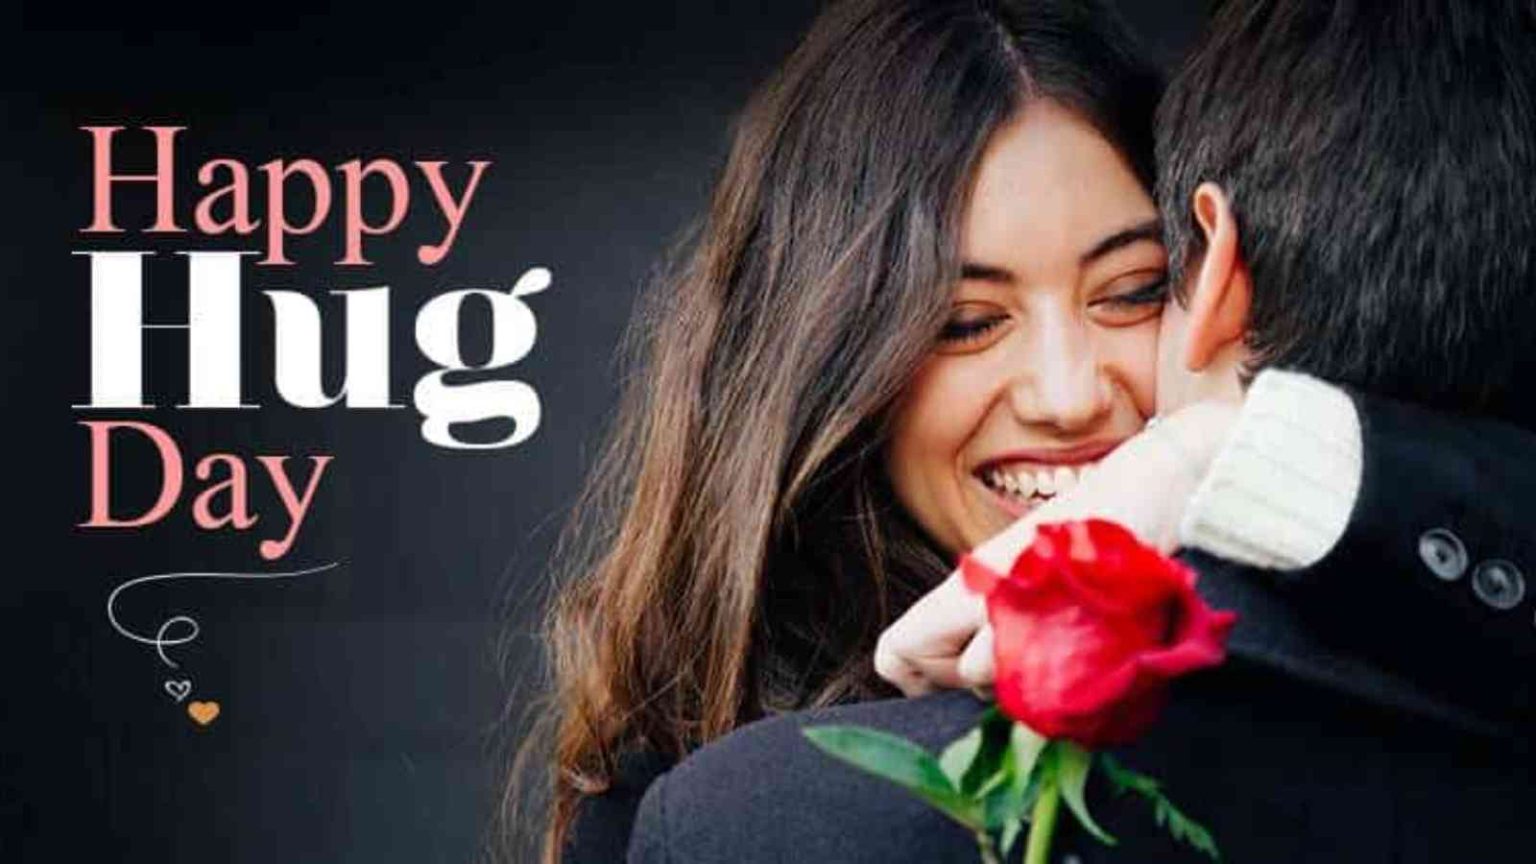 Express Your Love with Heartfelt Hug Day Wishes for Your Husband